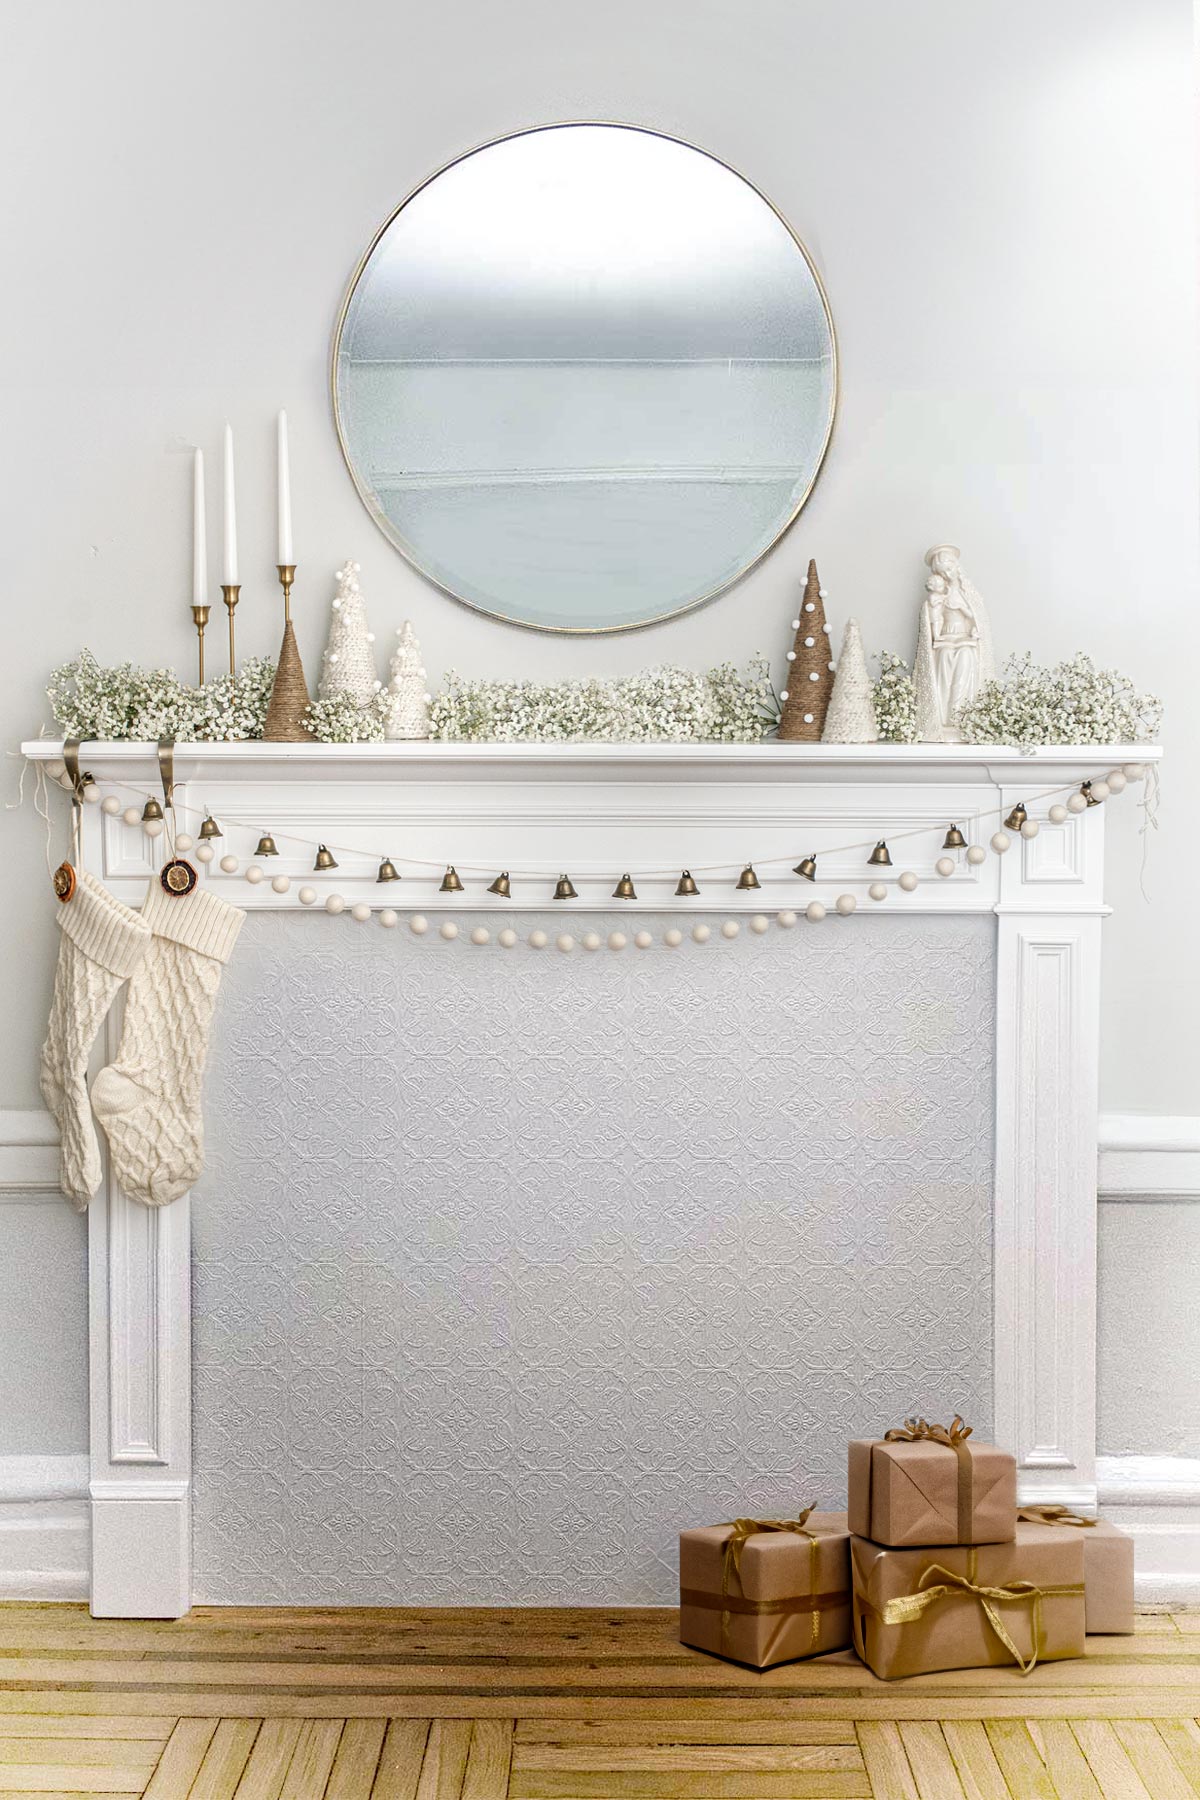 A minimally designed Christmas mantle with baby's breath and presents on the ground.